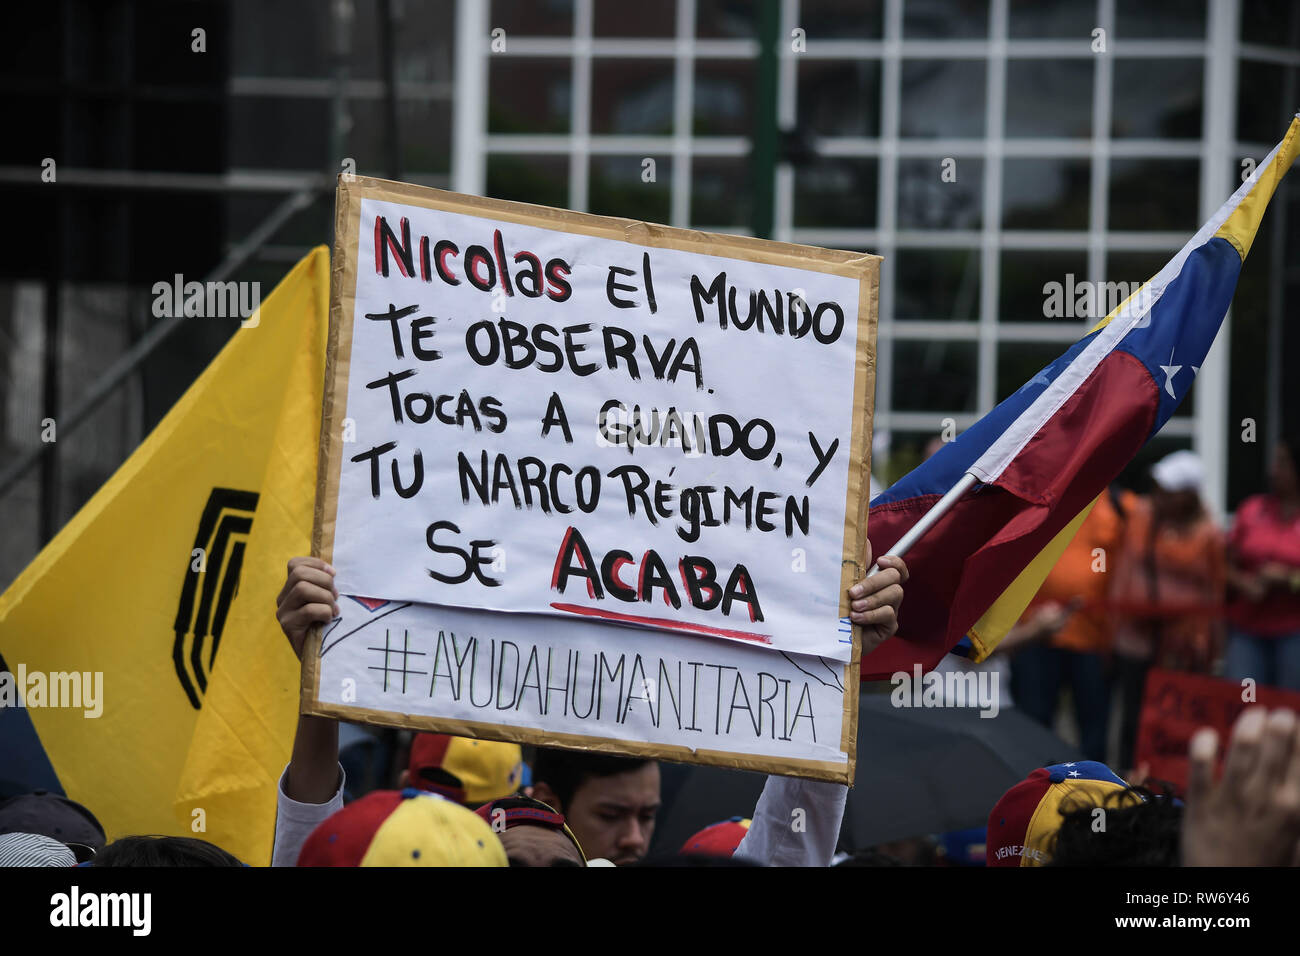 A man seen holding a placard during a rally in support of Juan Guaido. Juan Guaido, the Venezuelan opposition leader, where many nations have recognized as the legitimate interim president of Venezuela, greets his supporters during a rally against the government of President Nicolas Maduro in Caracas. Stock Photo